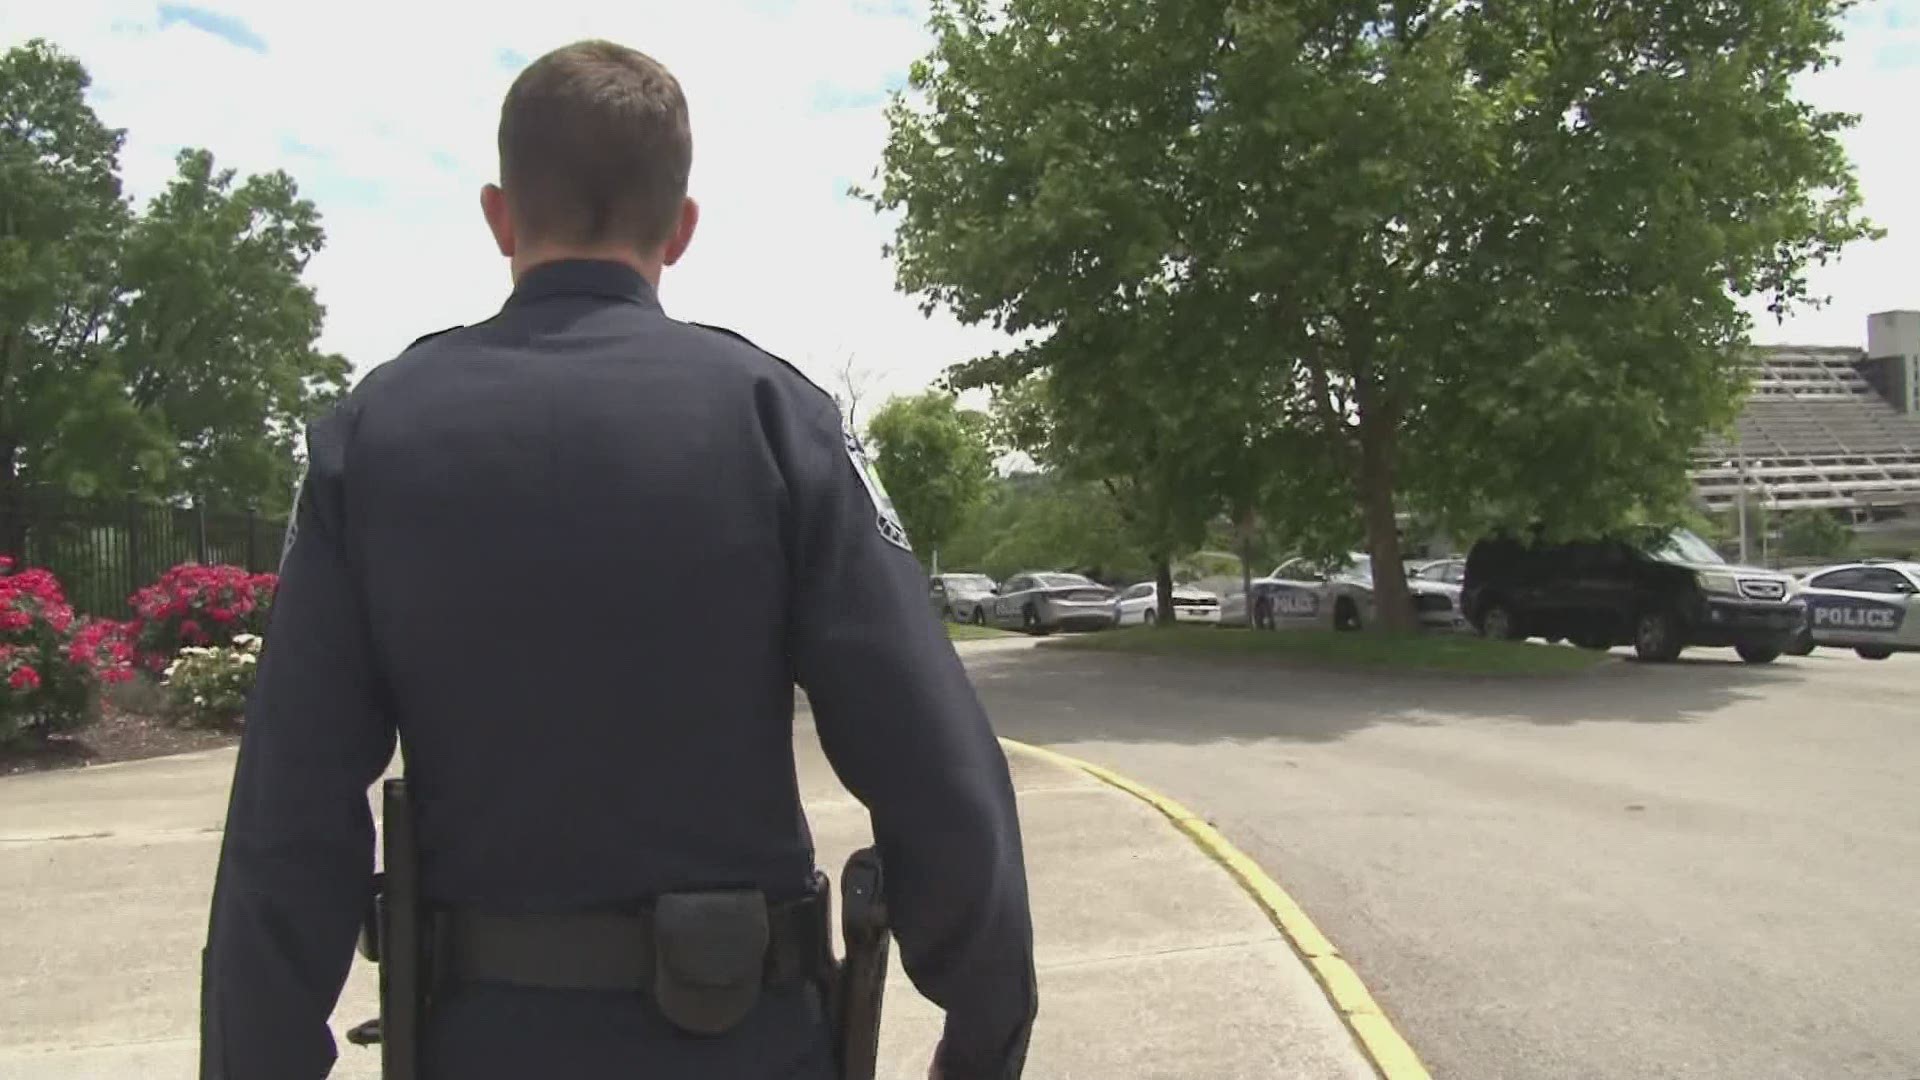 For Knoxville police, finding solutions to stop violence is a top priority. They now hope to find those solutions by working with community members.